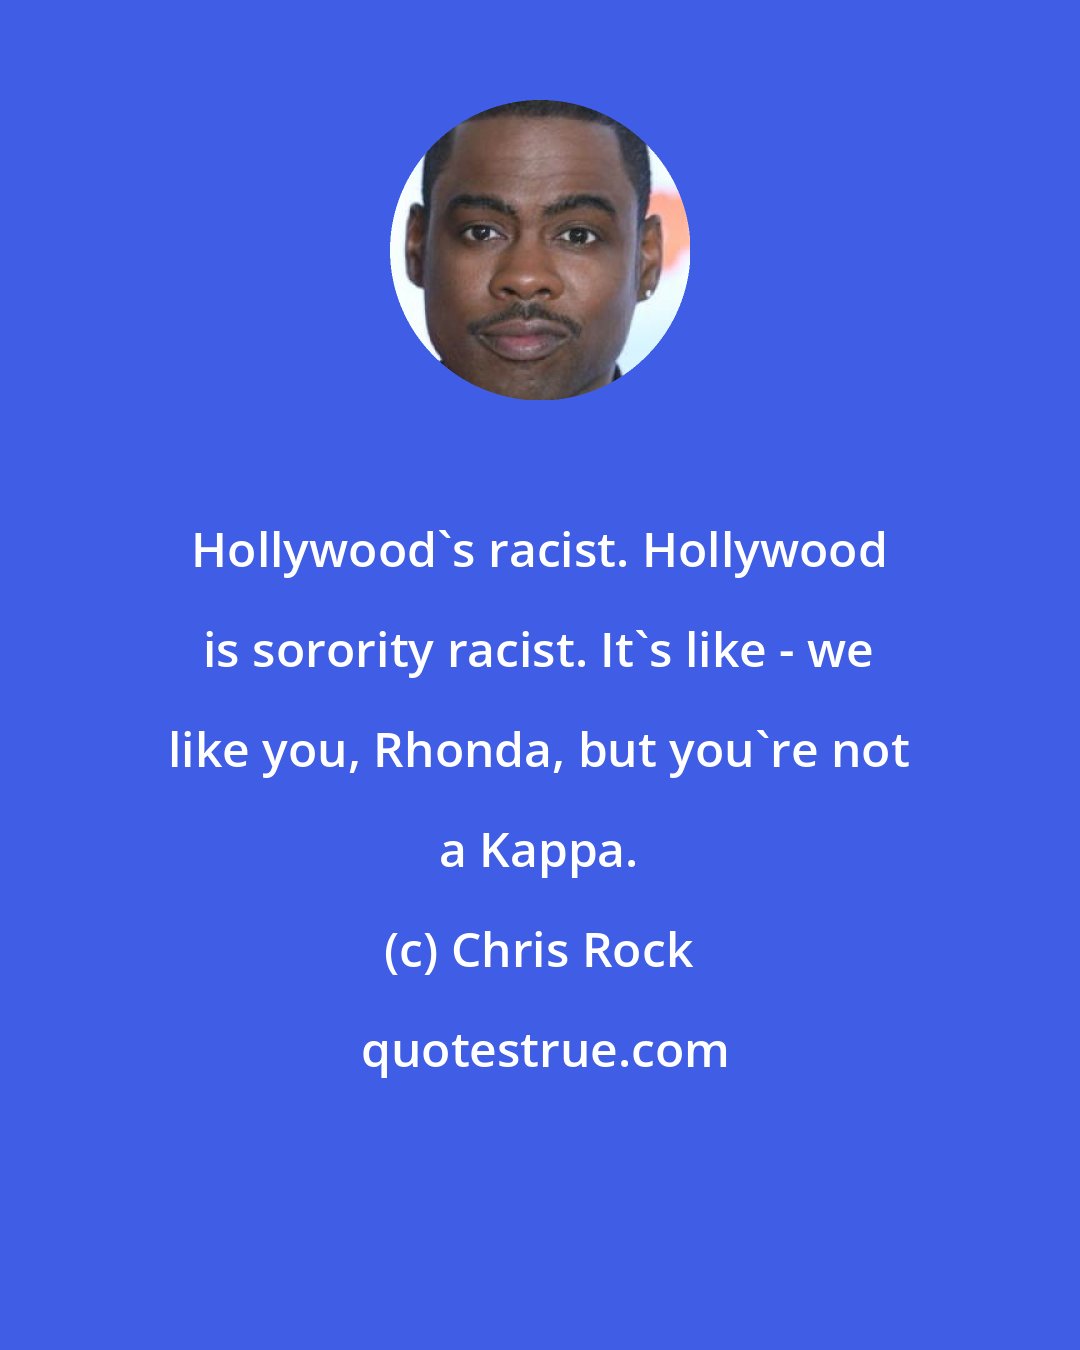 Chris Rock: Hollywood's racist. Hollywood is sorority racist. It's like - we like you, Rhonda, but you're not a Kappa.